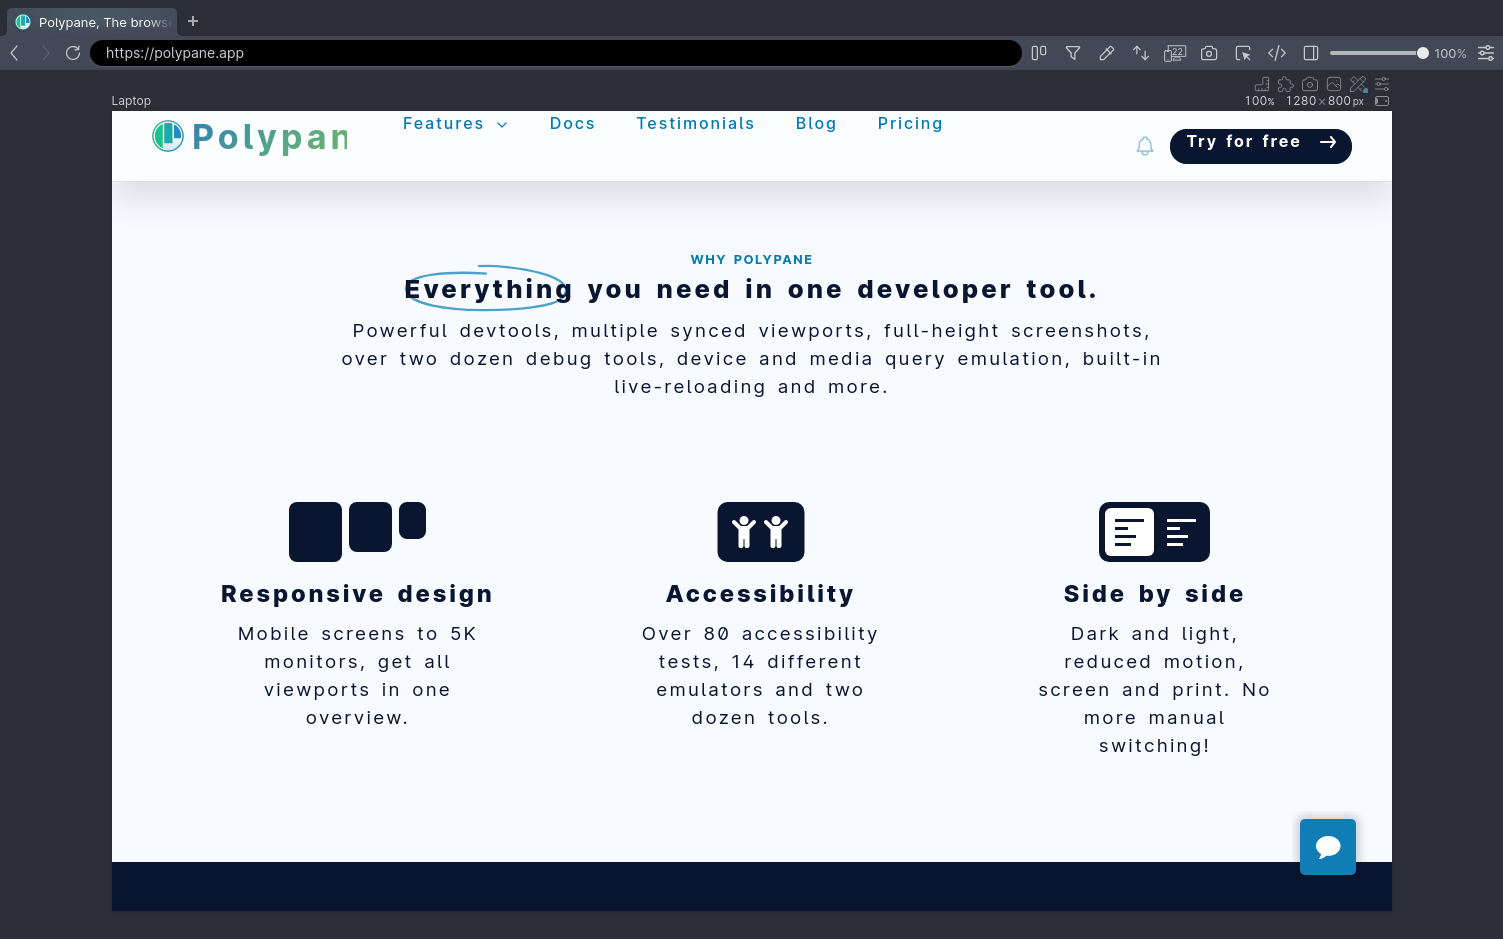 The Polypane homepage with expanded text spacing. Some elements are no longer fully readable.